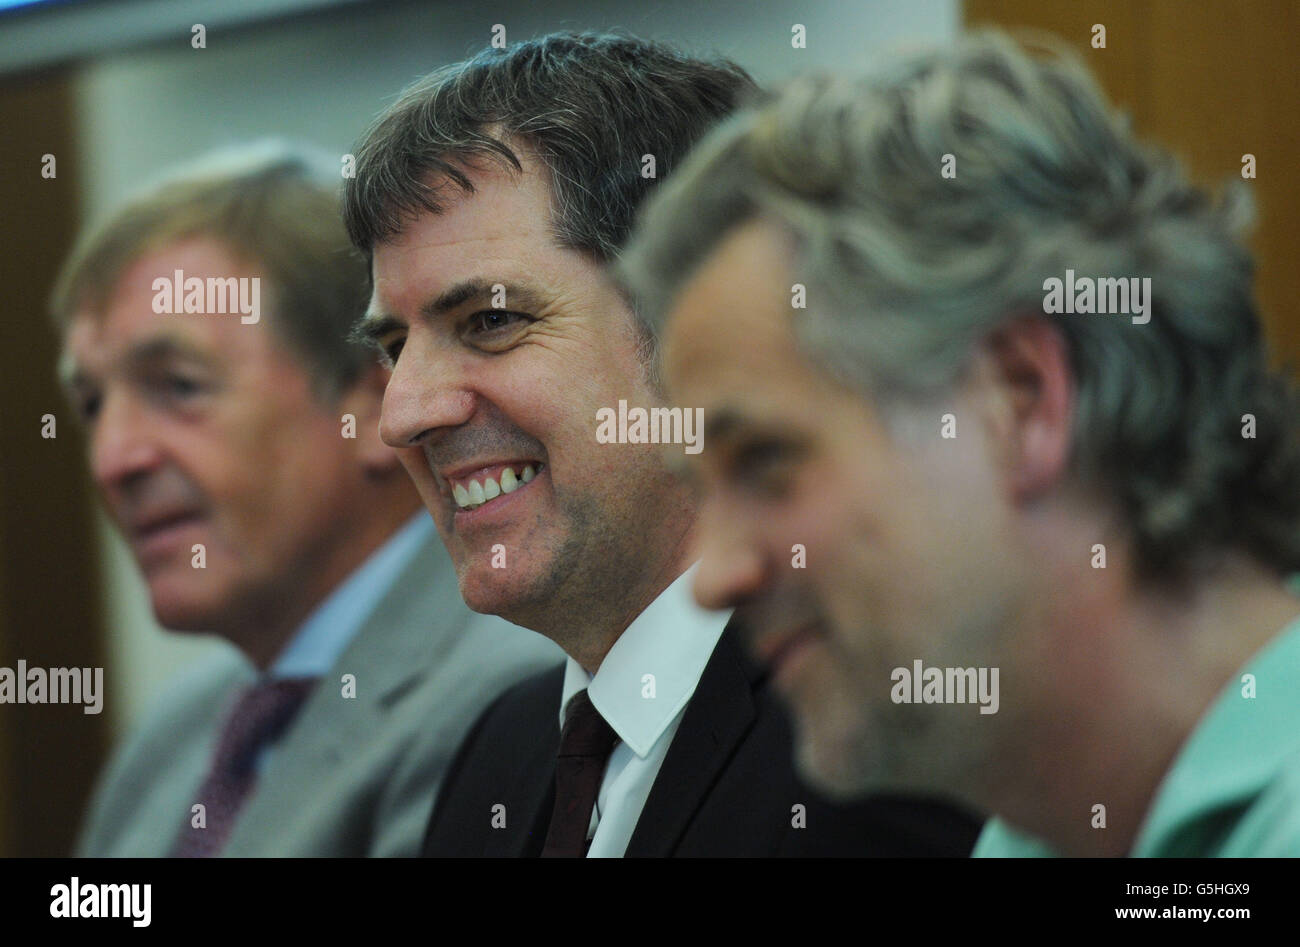 (Left - right) Former Liverpool manager Kenny Dalglish, Steve Rotheram MP for Liverpool Walton and music producer Guy Chambers hold a press conference at the Houses of Parliament, London, to announce plans for a Hillsborough charity single to raise money for the families of Hillsborough victims' legal costs. The single, He ain't Heavy, He's My Brother, will go on sale on December 17. Stock Photo